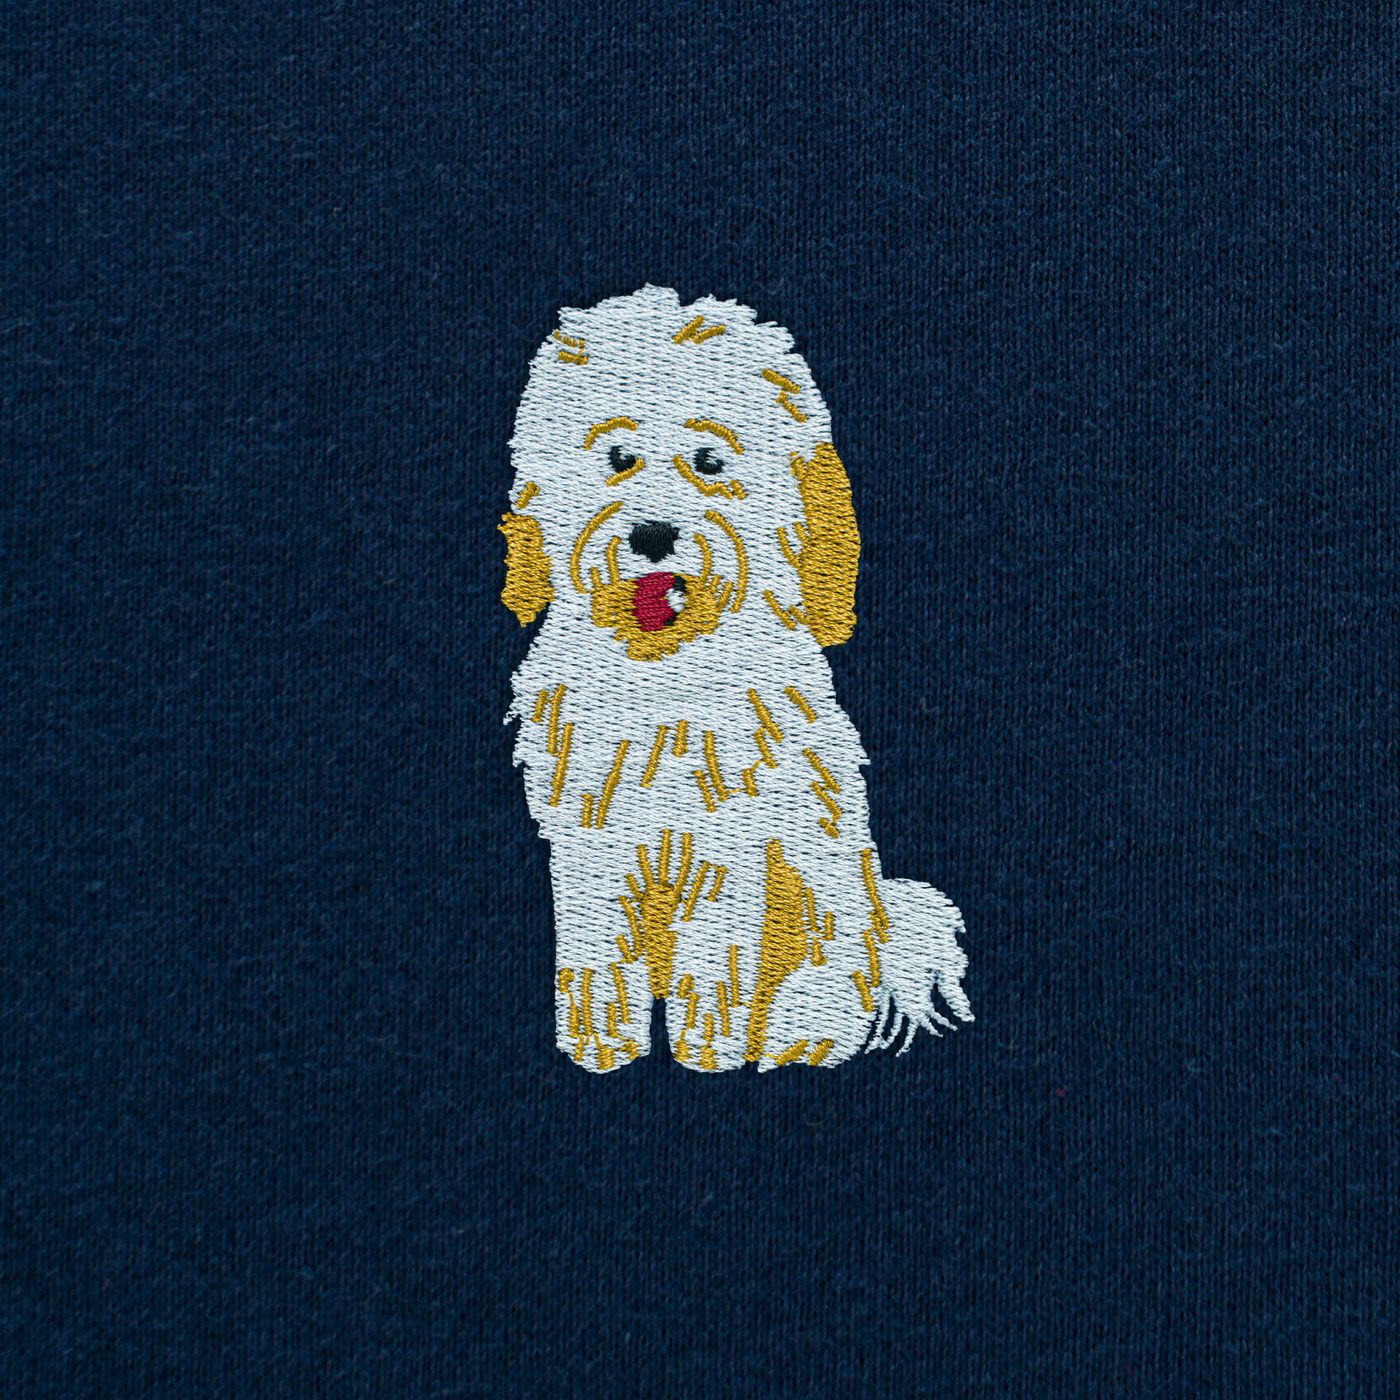 Bobby's Planet Kids Embroidered Poodle T-Shirt from Bobbys Planet Toy Poodle Collection in Navy Color#color_navy